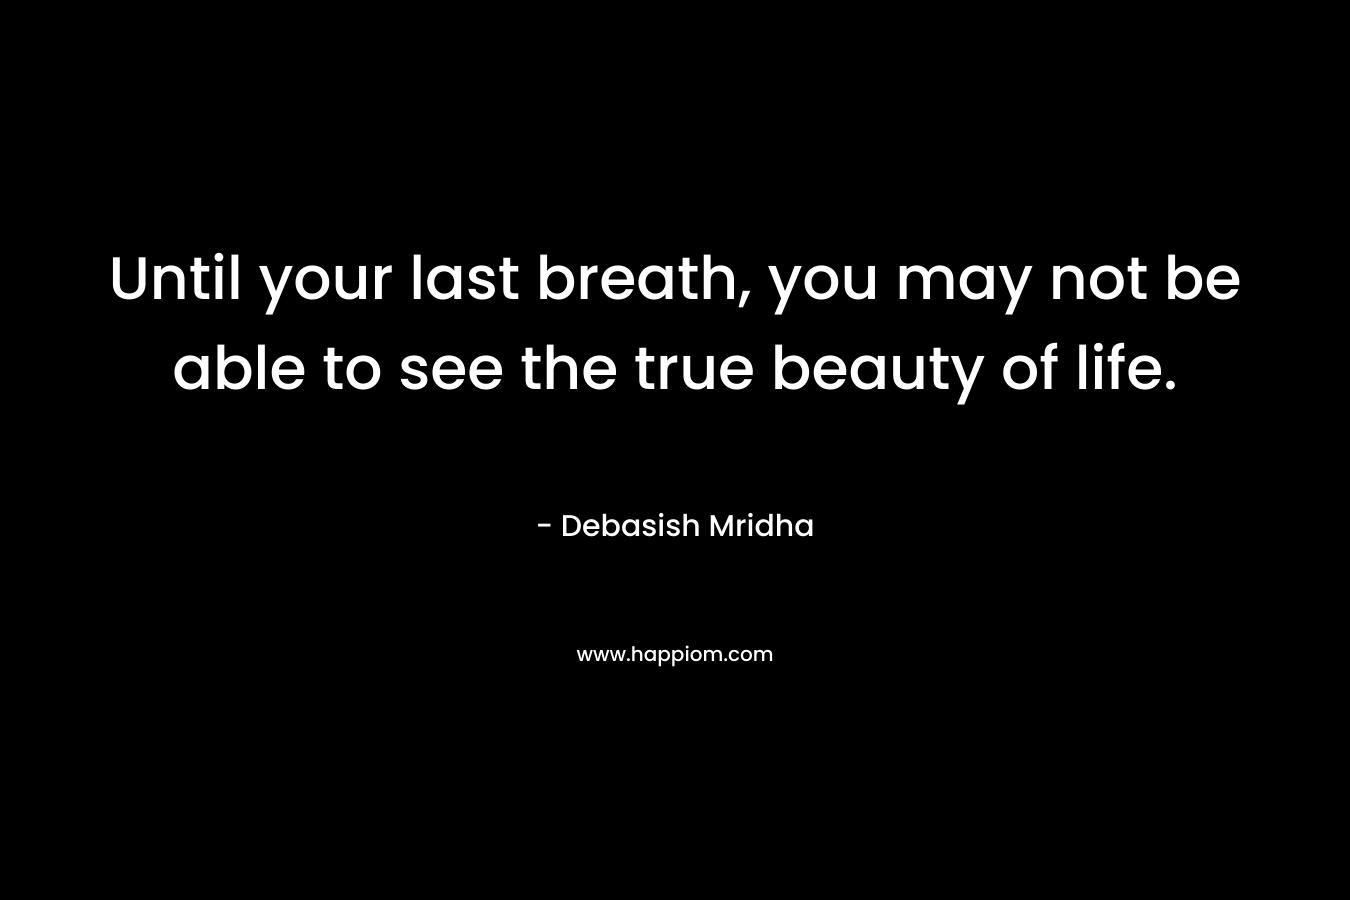 Until your last breath, you may not be able to see the true beauty of life.